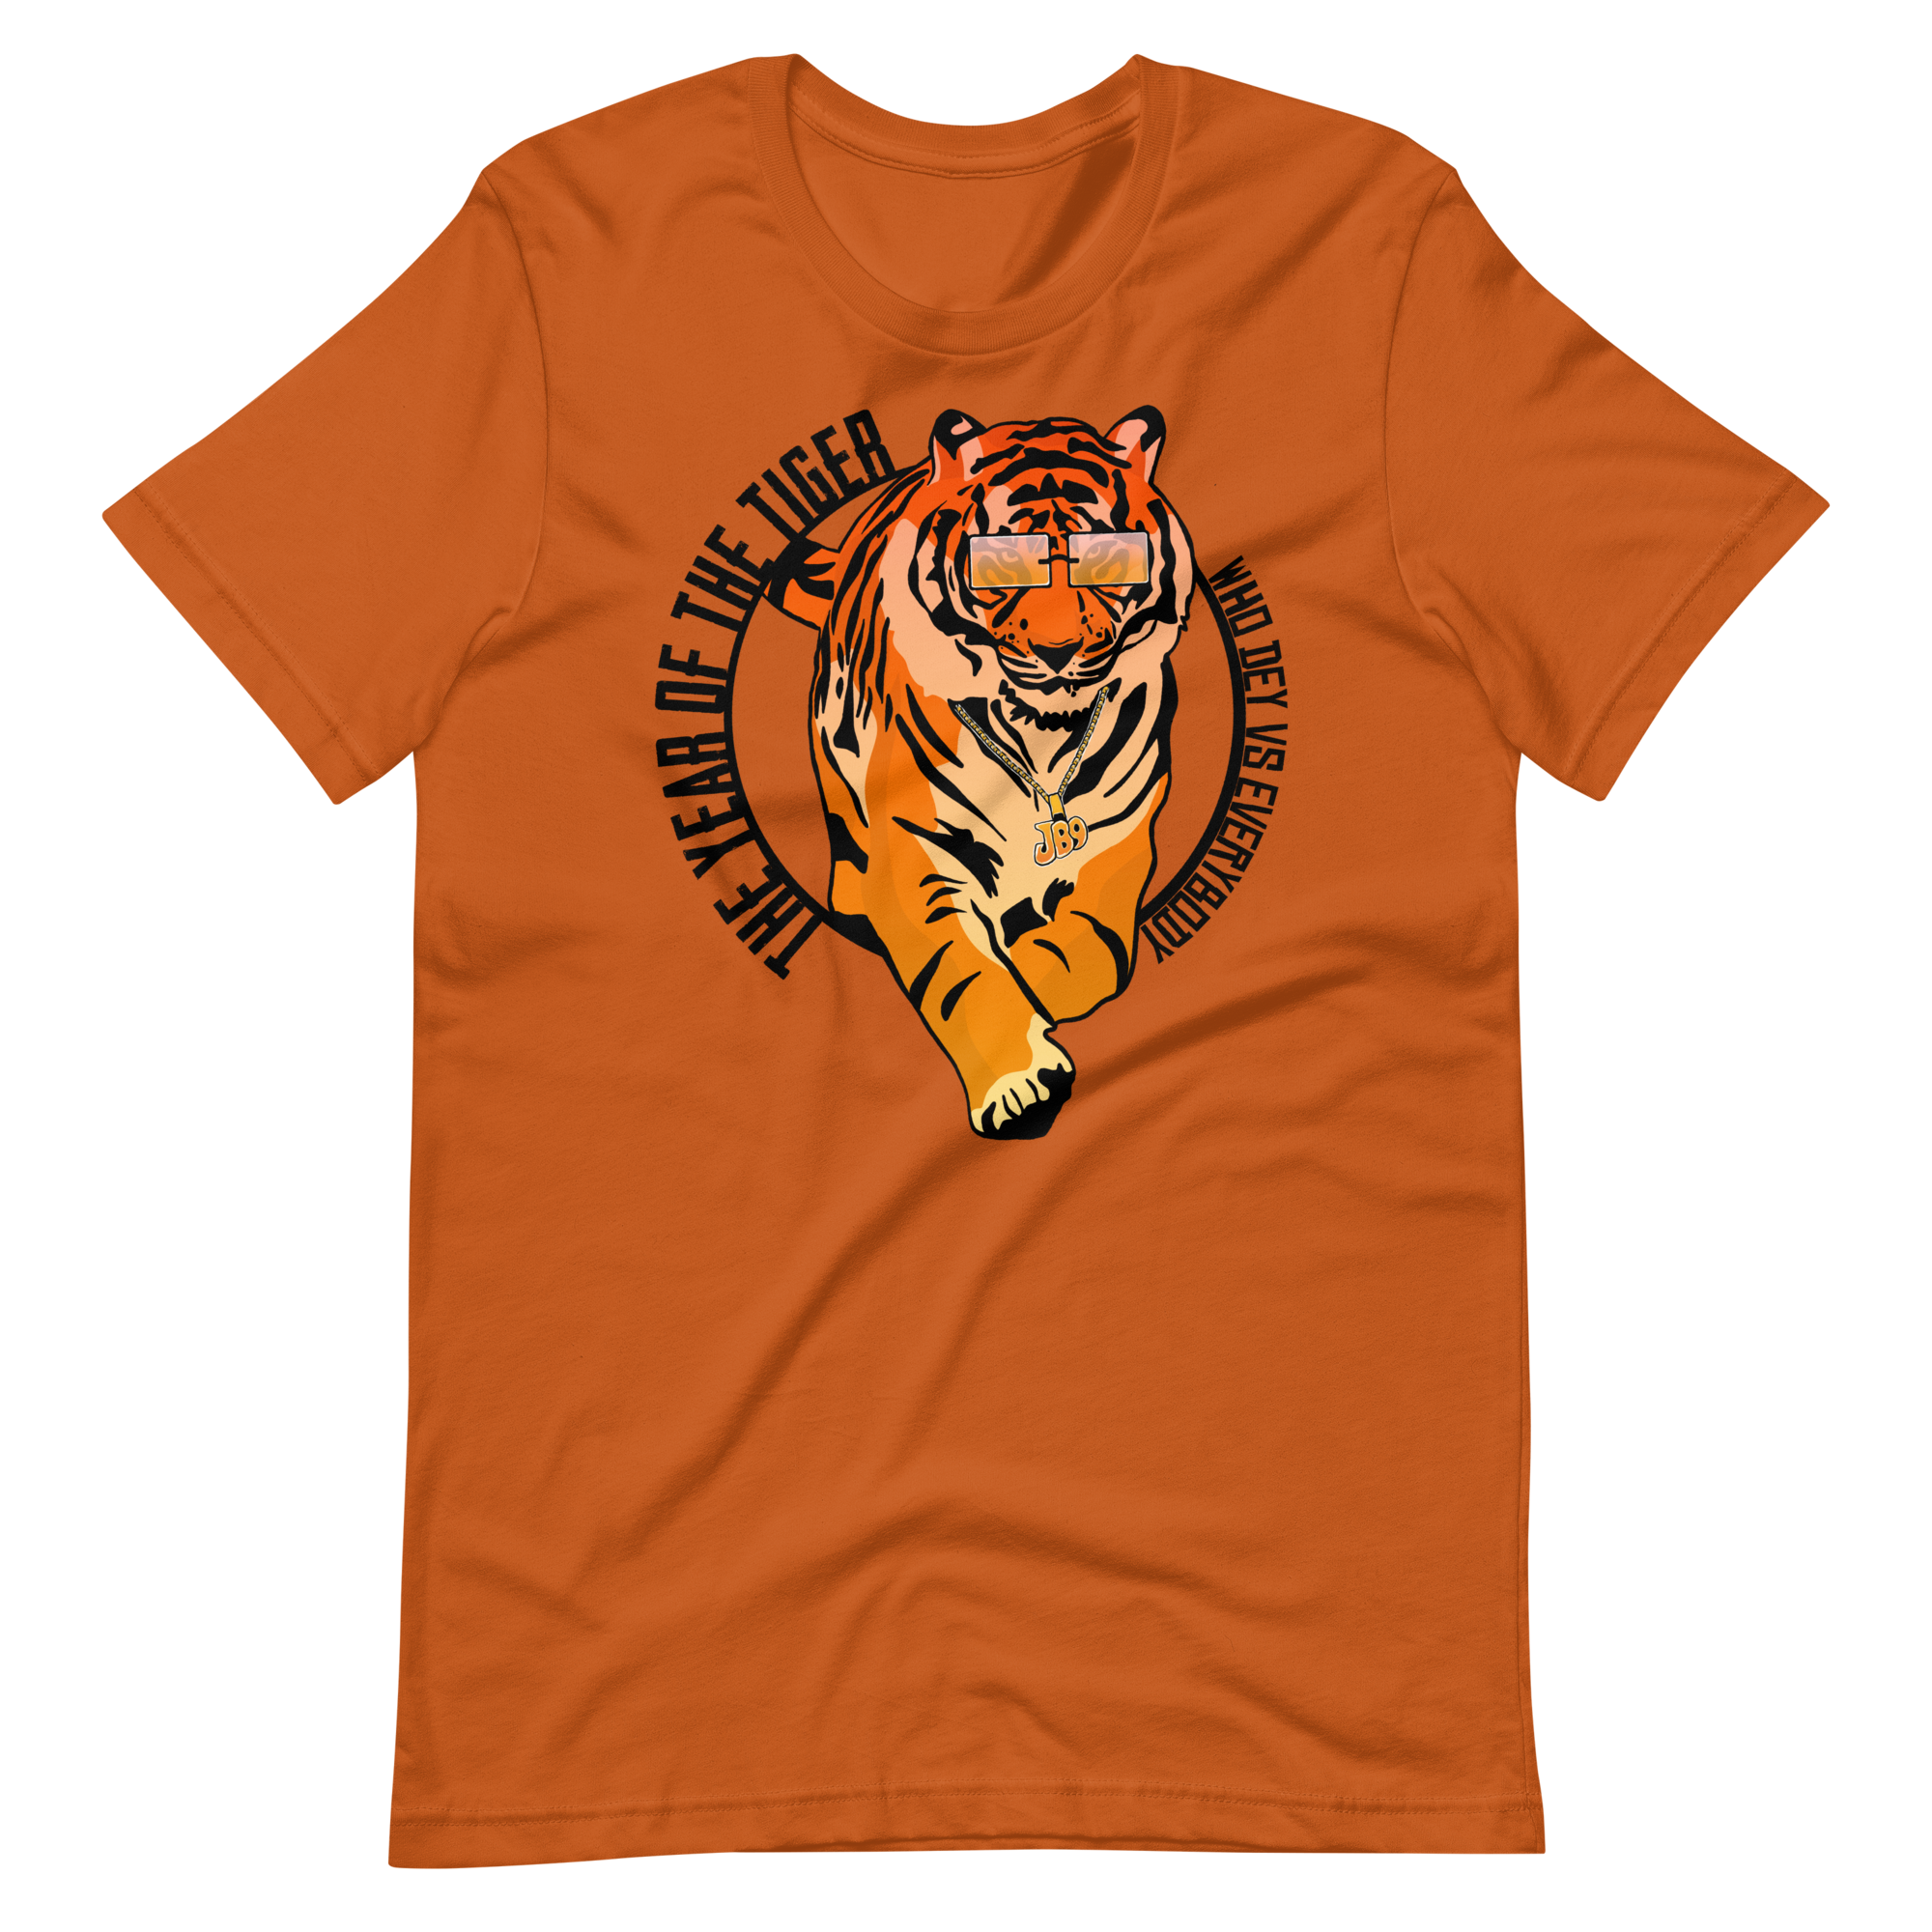 Year of the Tiger: Who Dey Vs Everybody